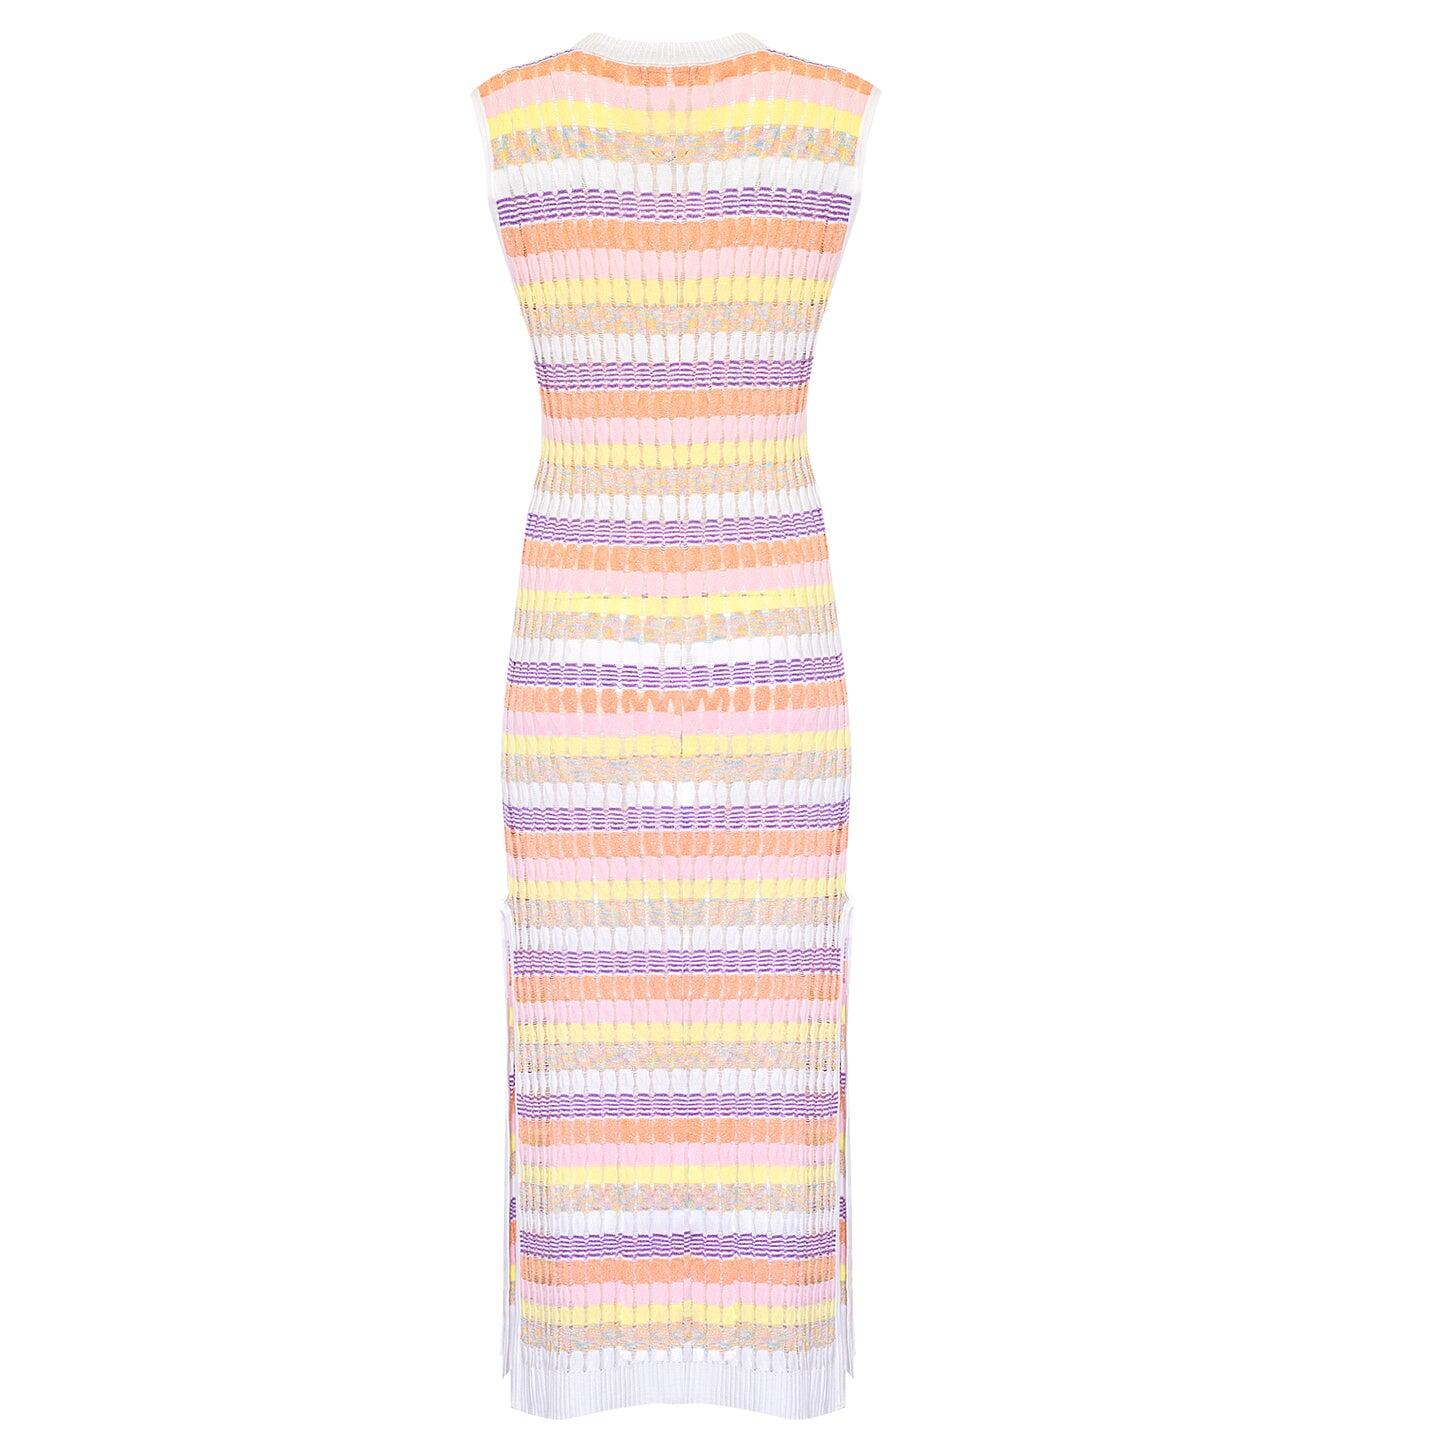 Racking Knit Dress: Maxi with Front Neckline in Triple Shade